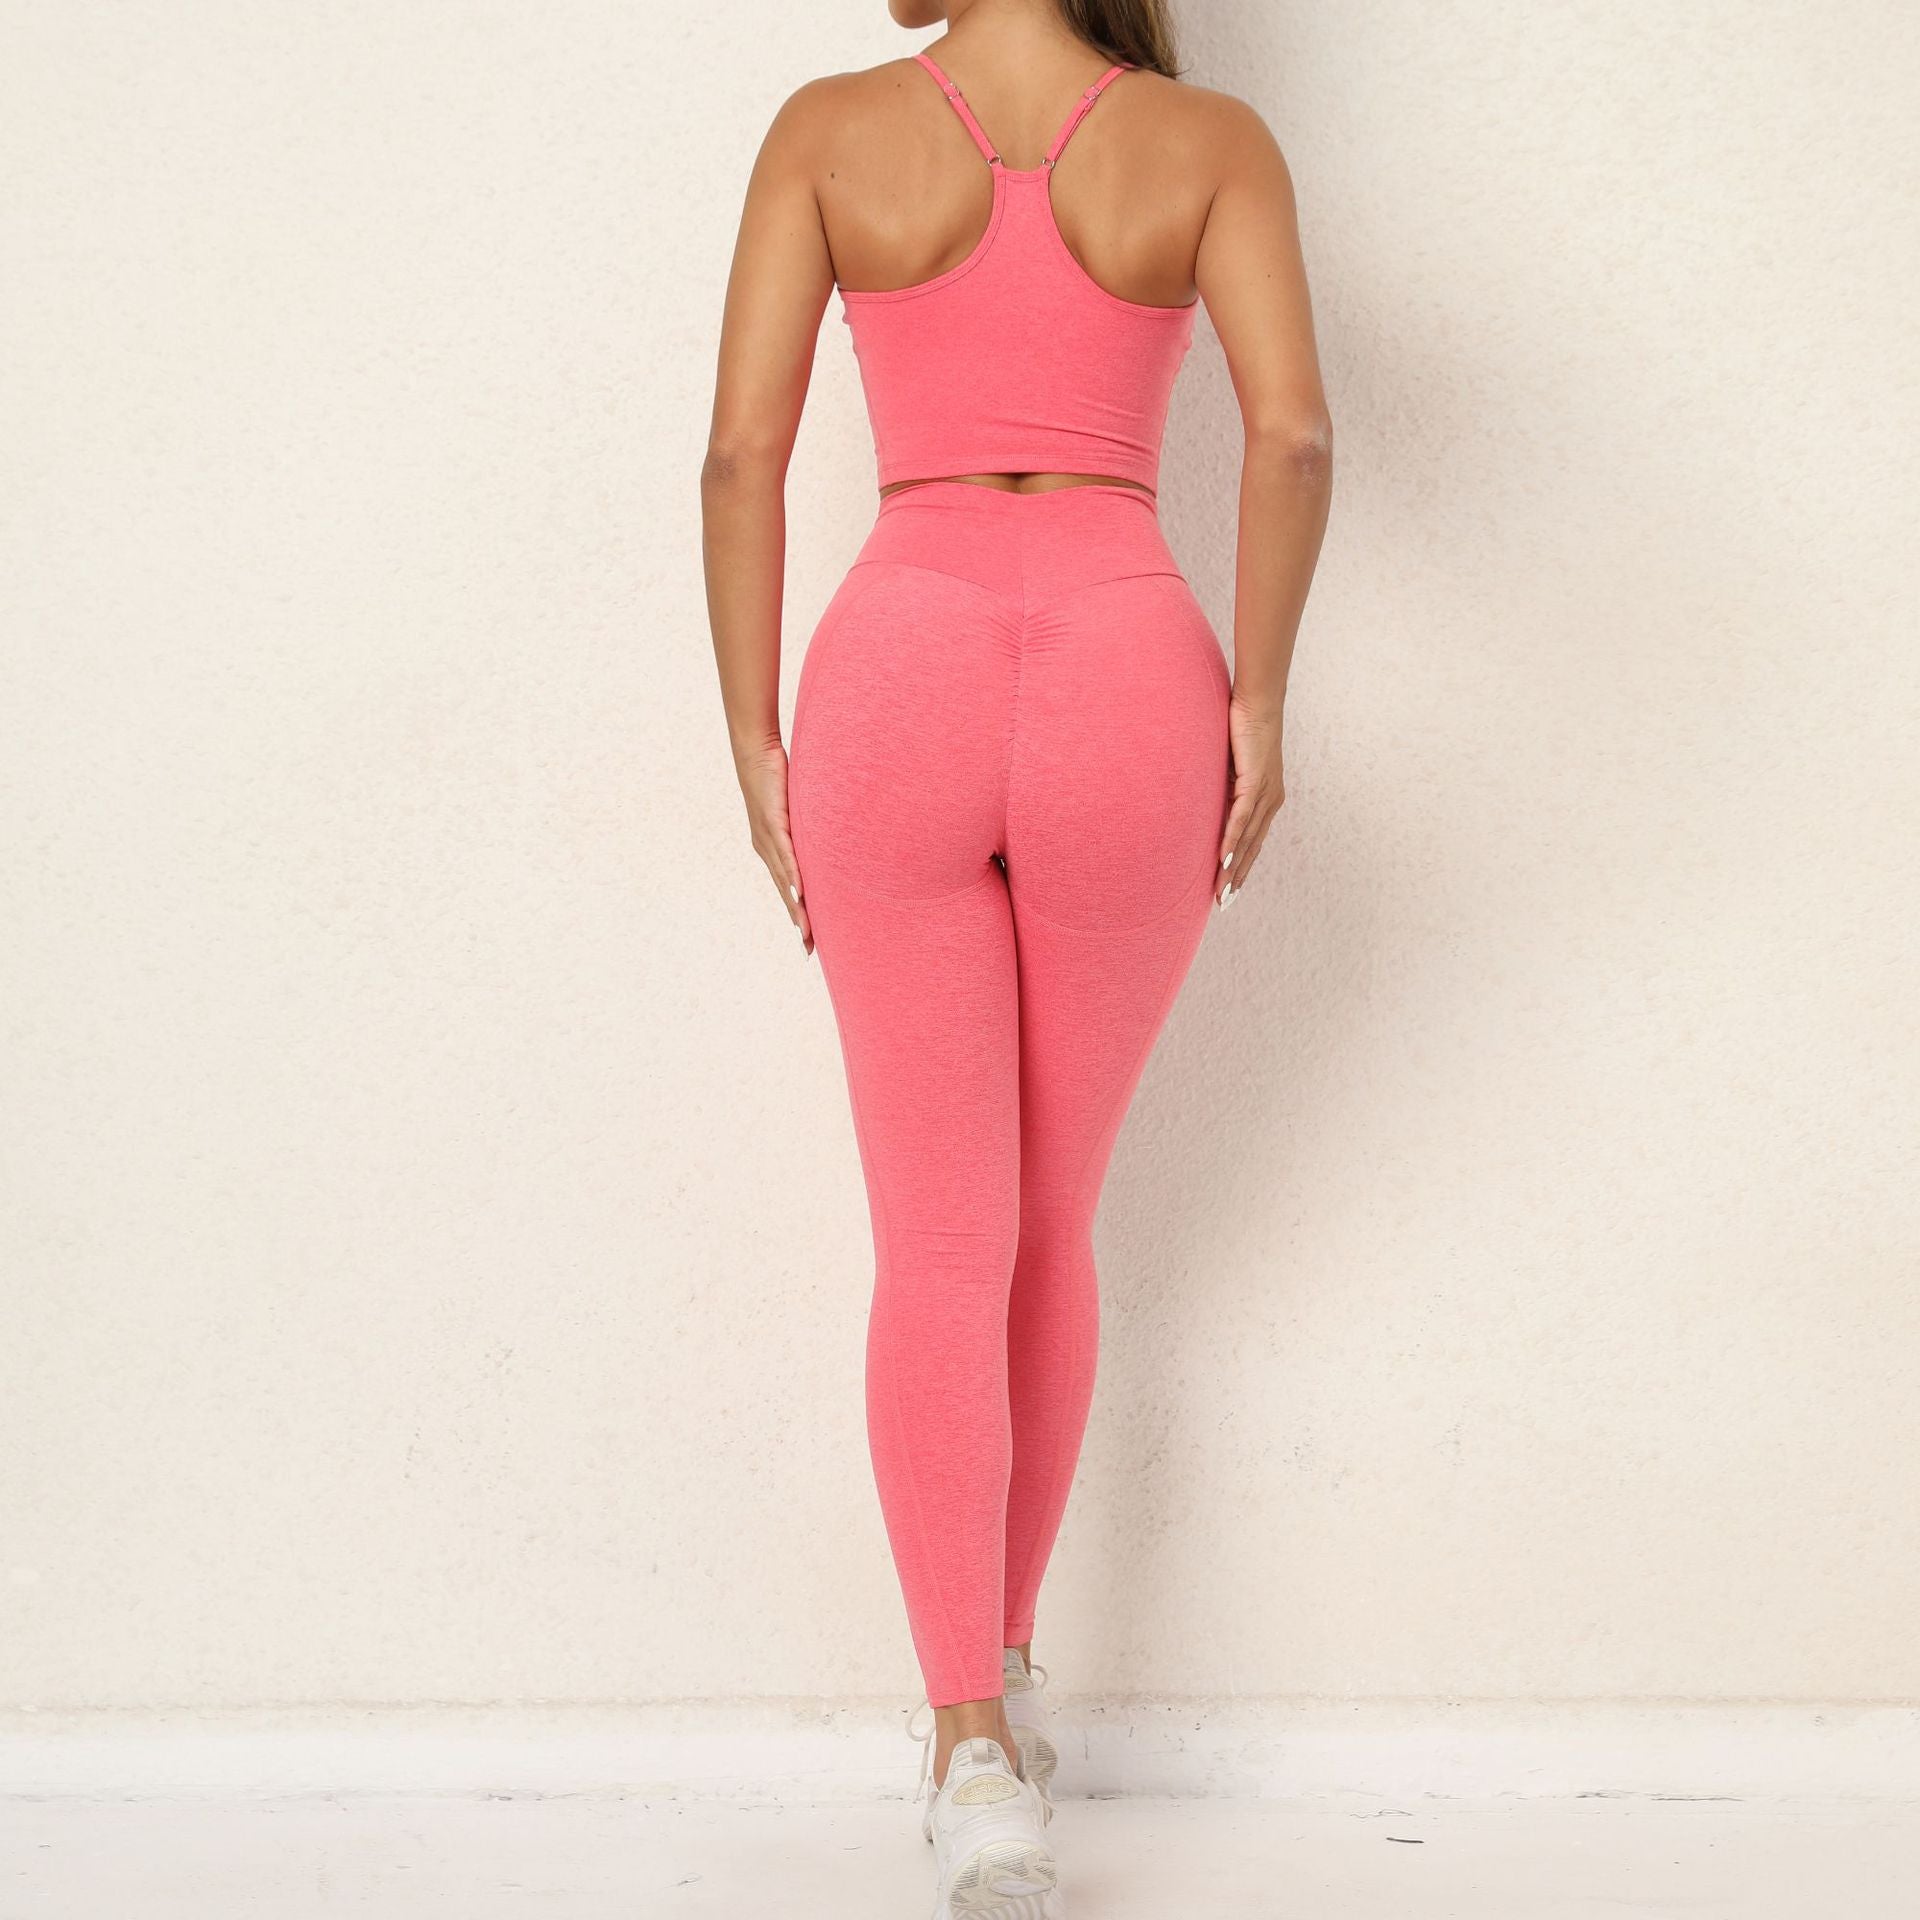 Sexy High Waist Yoga Suits for Women-Activewear-Pink-S-Free Shipping at meselling99